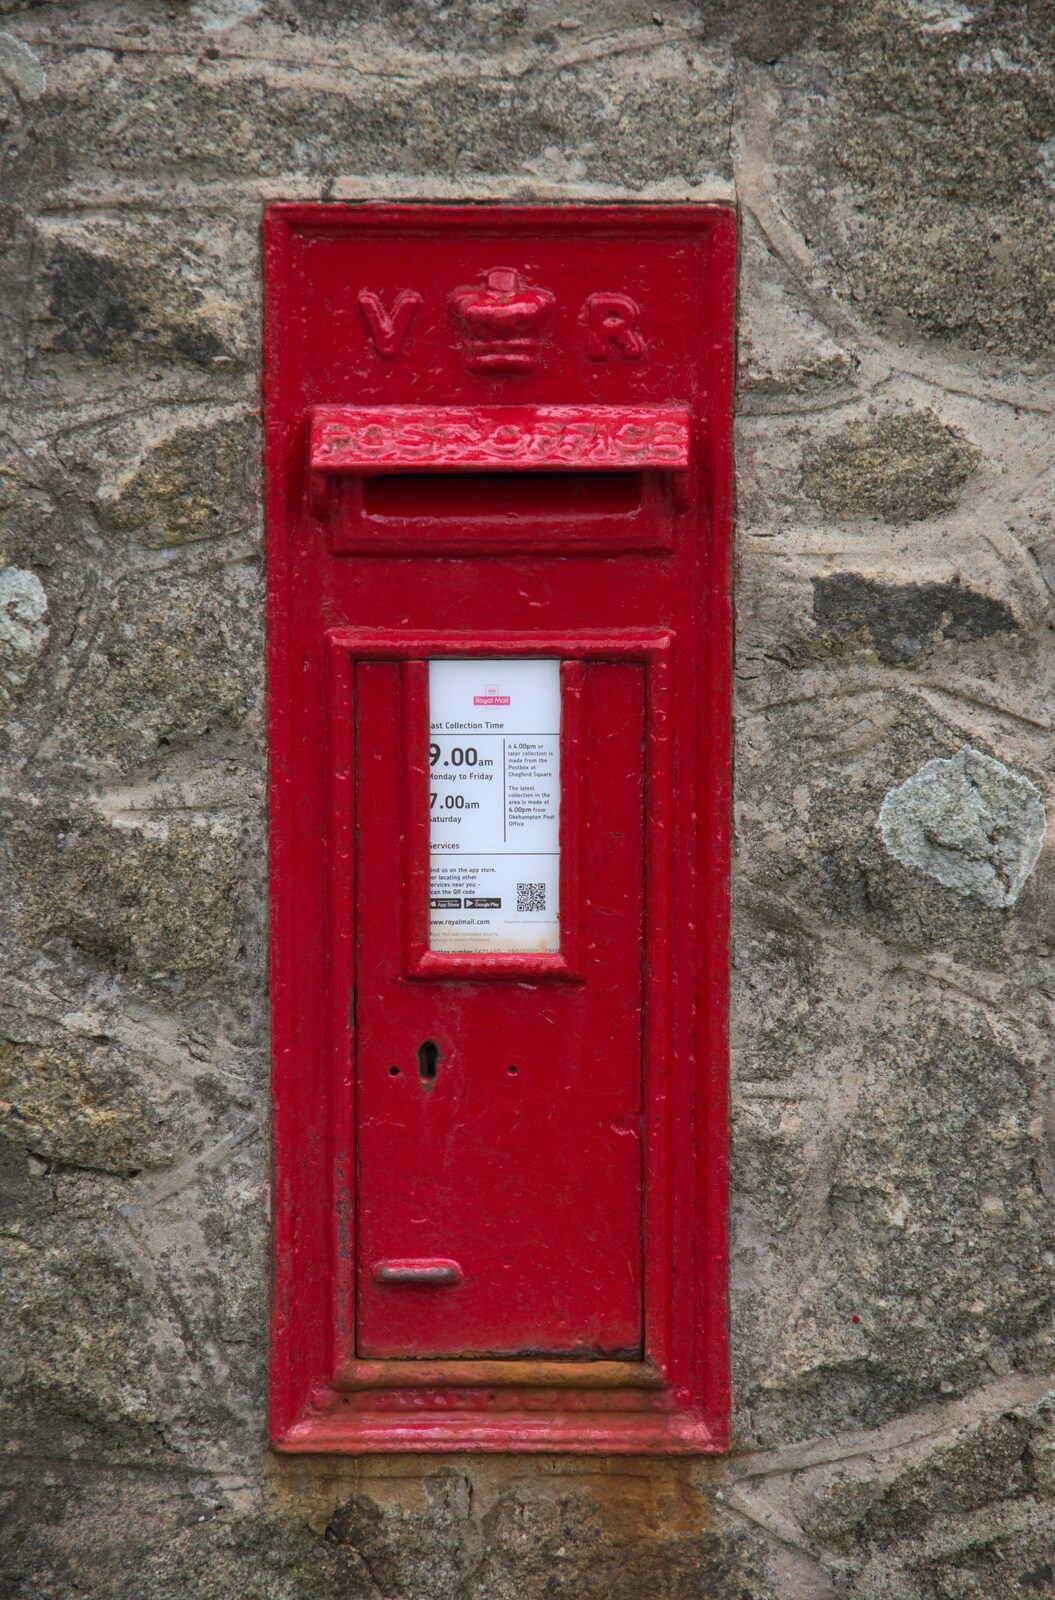 A Queen Victoria post box in Providence from Easter in South Zeal and Moretonhampstead, Devon - 9th April